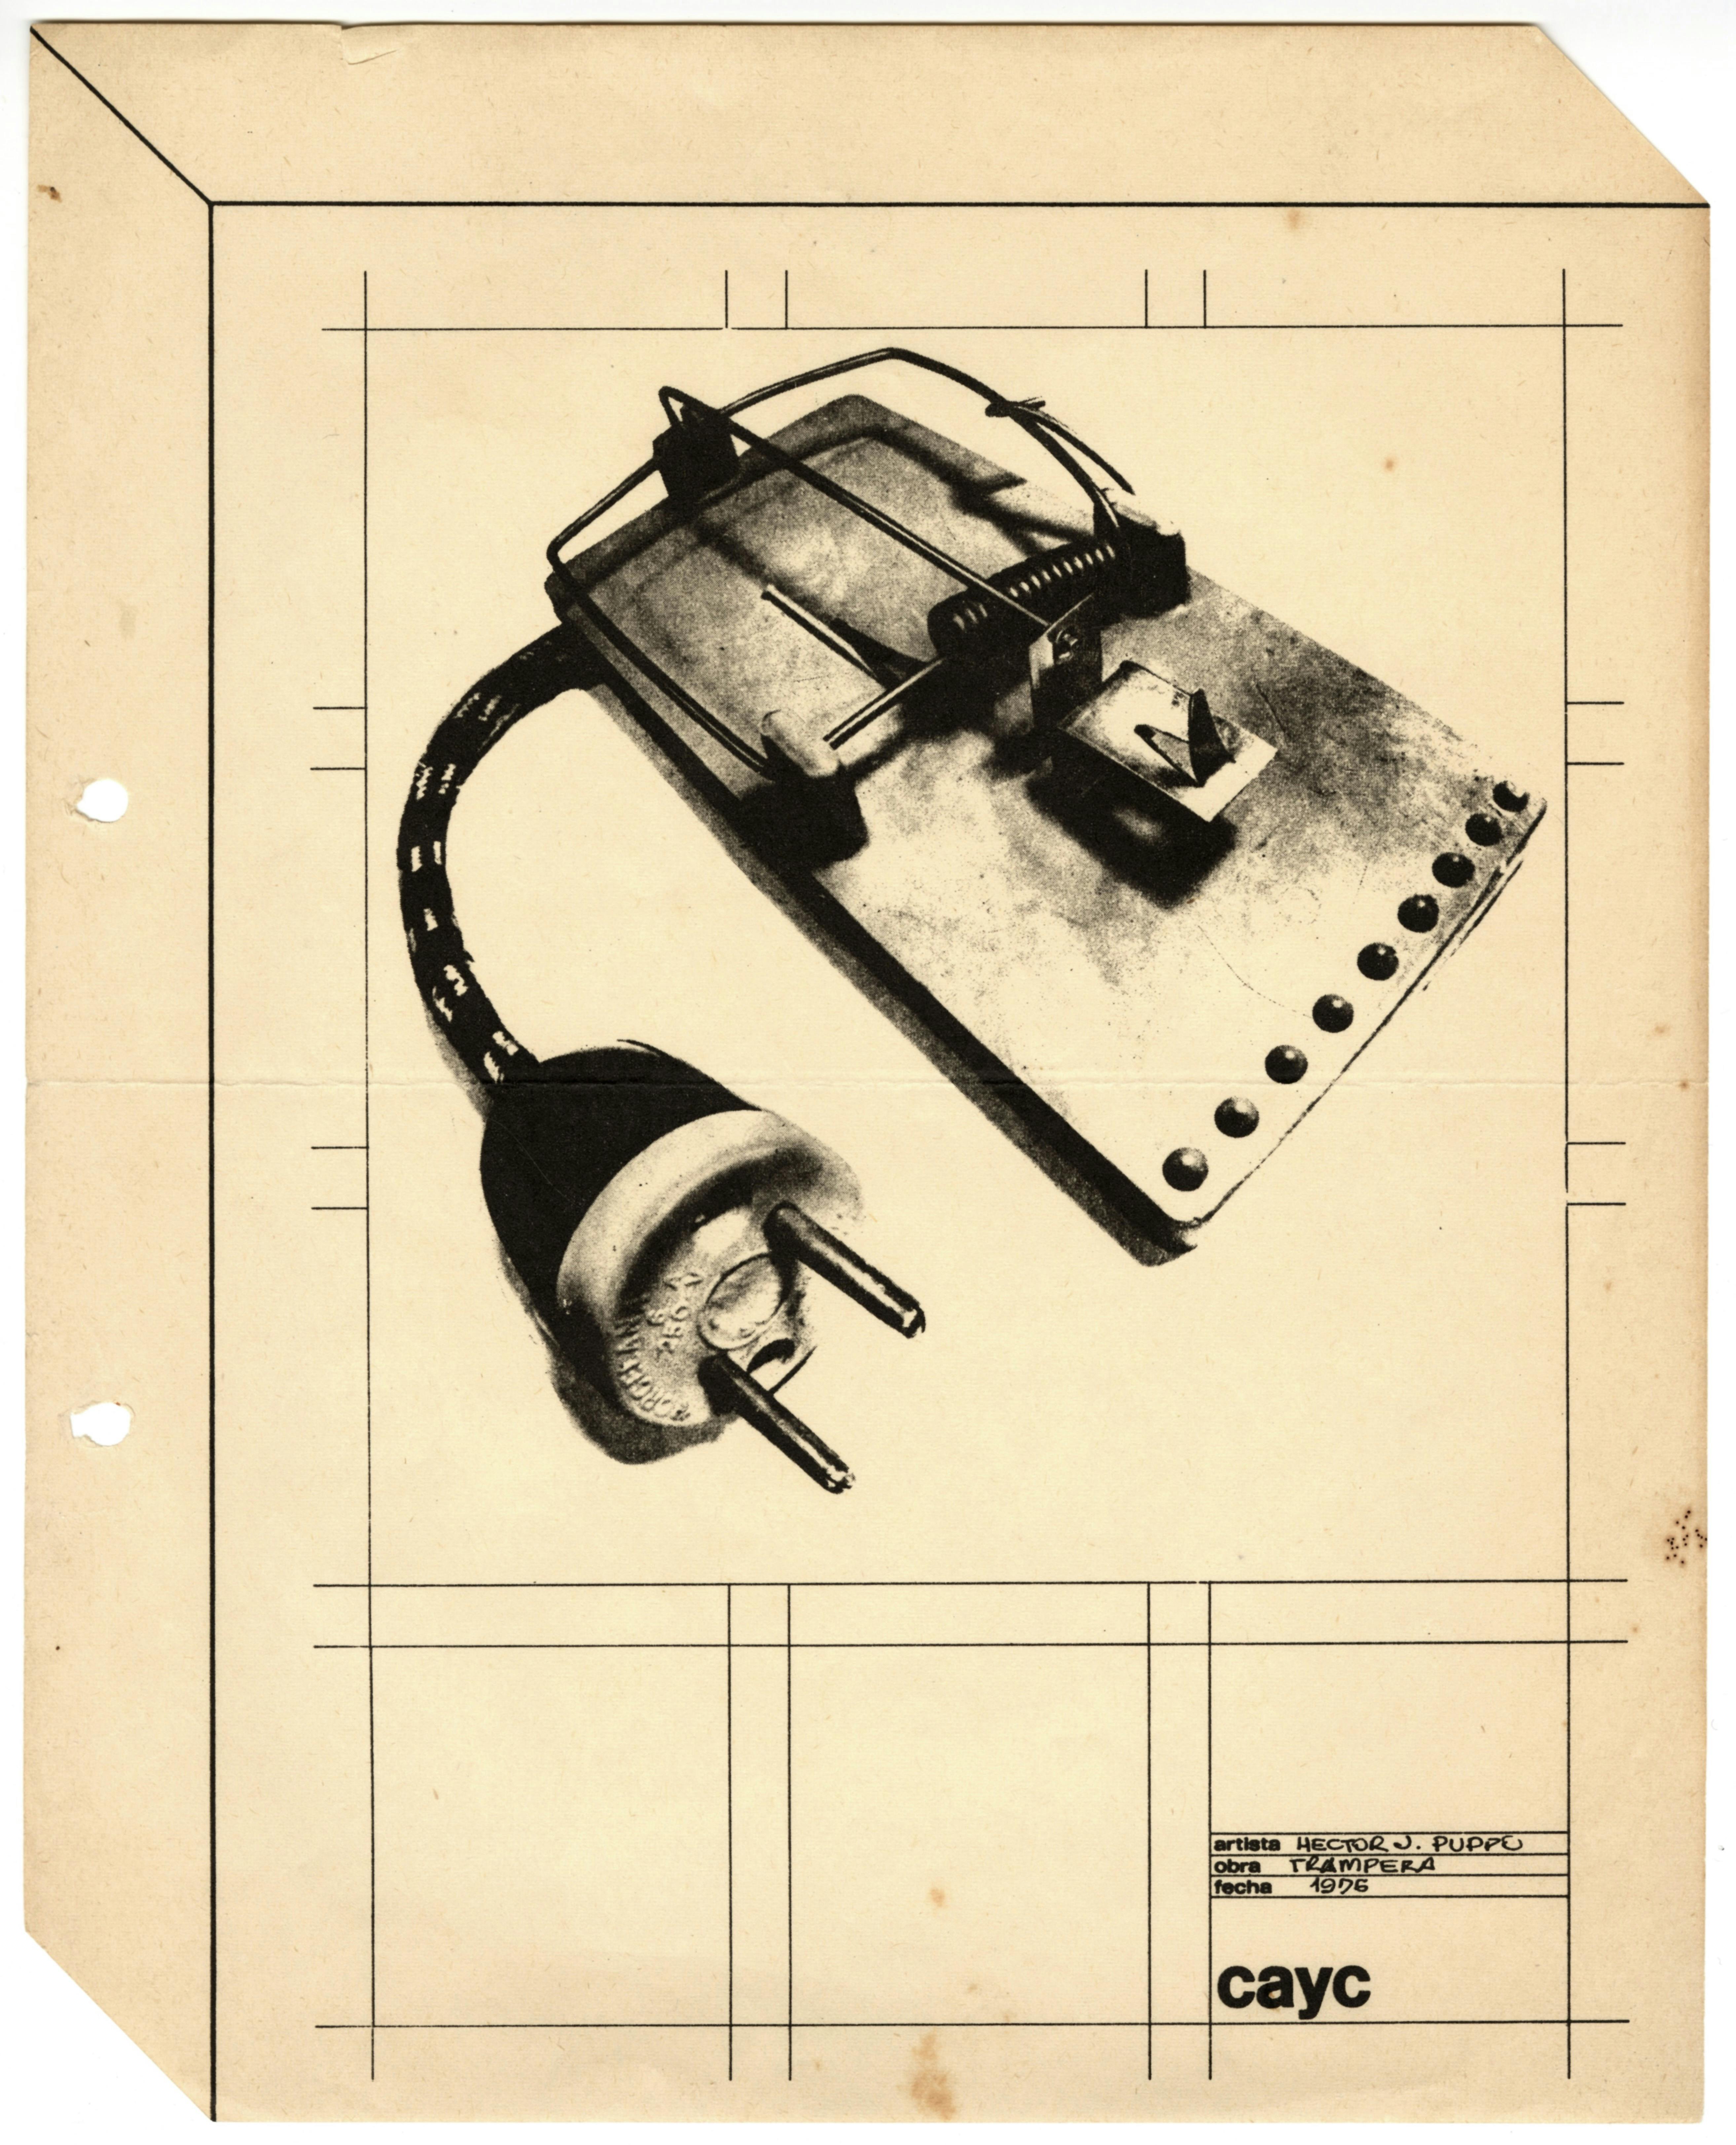 Printed on a piece of white paper is an image of a set mousetrap, from the back of which emerges a short electric cord with a two-prong plug. The bottom left and upper right corners of the paper are cut diagonally, and the page has been printed with black lines such that it appears to be a rectangular prism. On the bottom right corner of the page, a printed rectangle that has been filled out by hand reads: “Artista: Hector J. Puppo; Obra: Trampera; Fecha: 1976.” Below it is the logo of the CAYC.